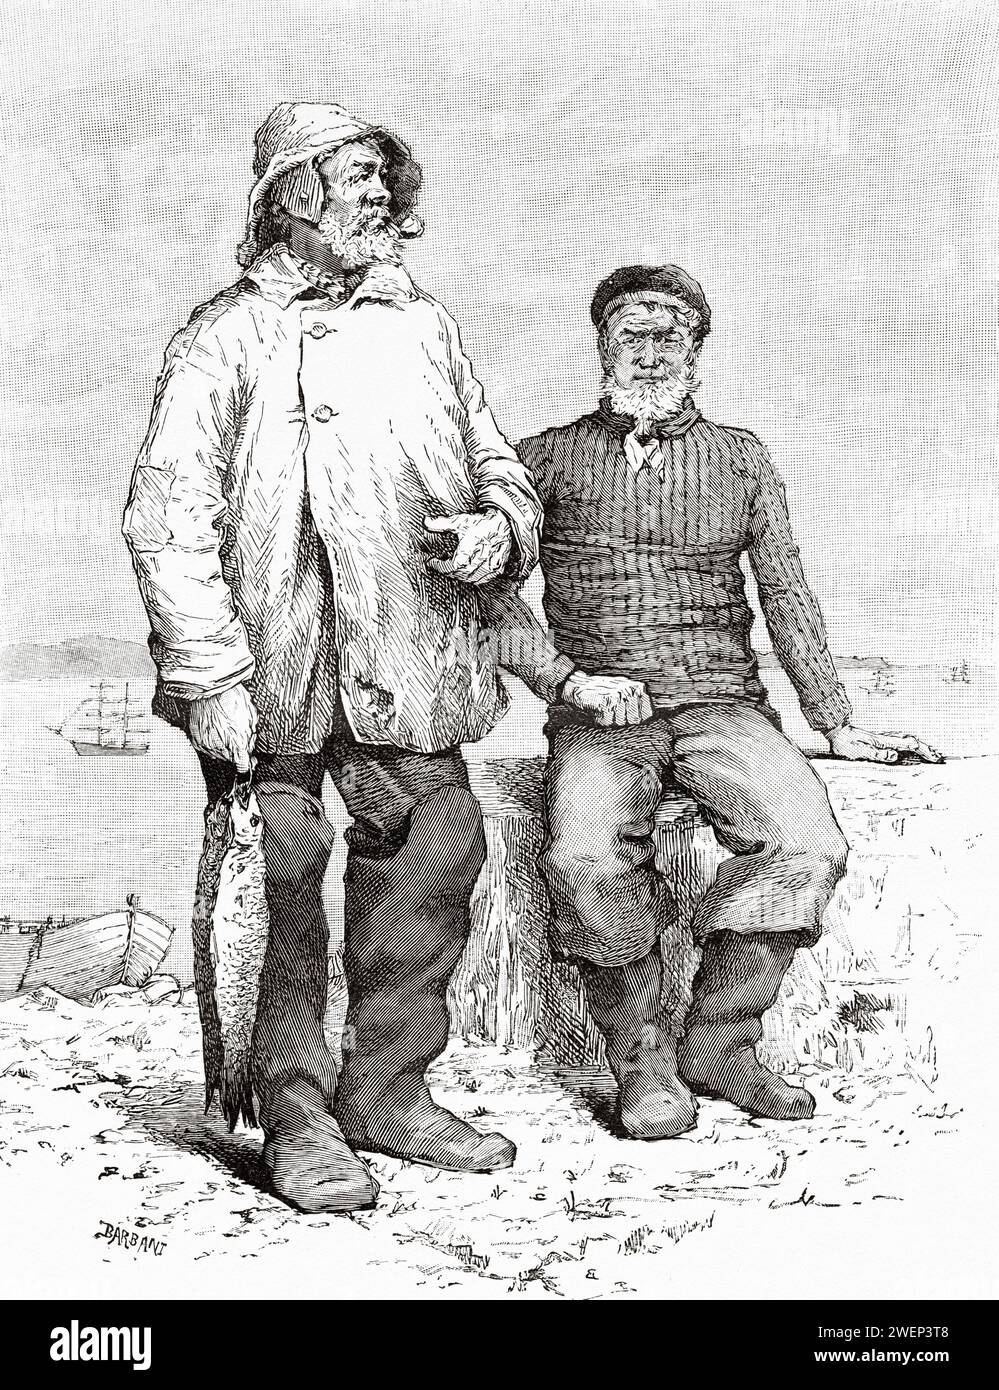 Old fishermen from the island of Newfoundland and Labrador, Canada. French Shore of the island of Newfoundland 1886 by Lieutenant Louis Koenig (1847-1920) Stock Photo